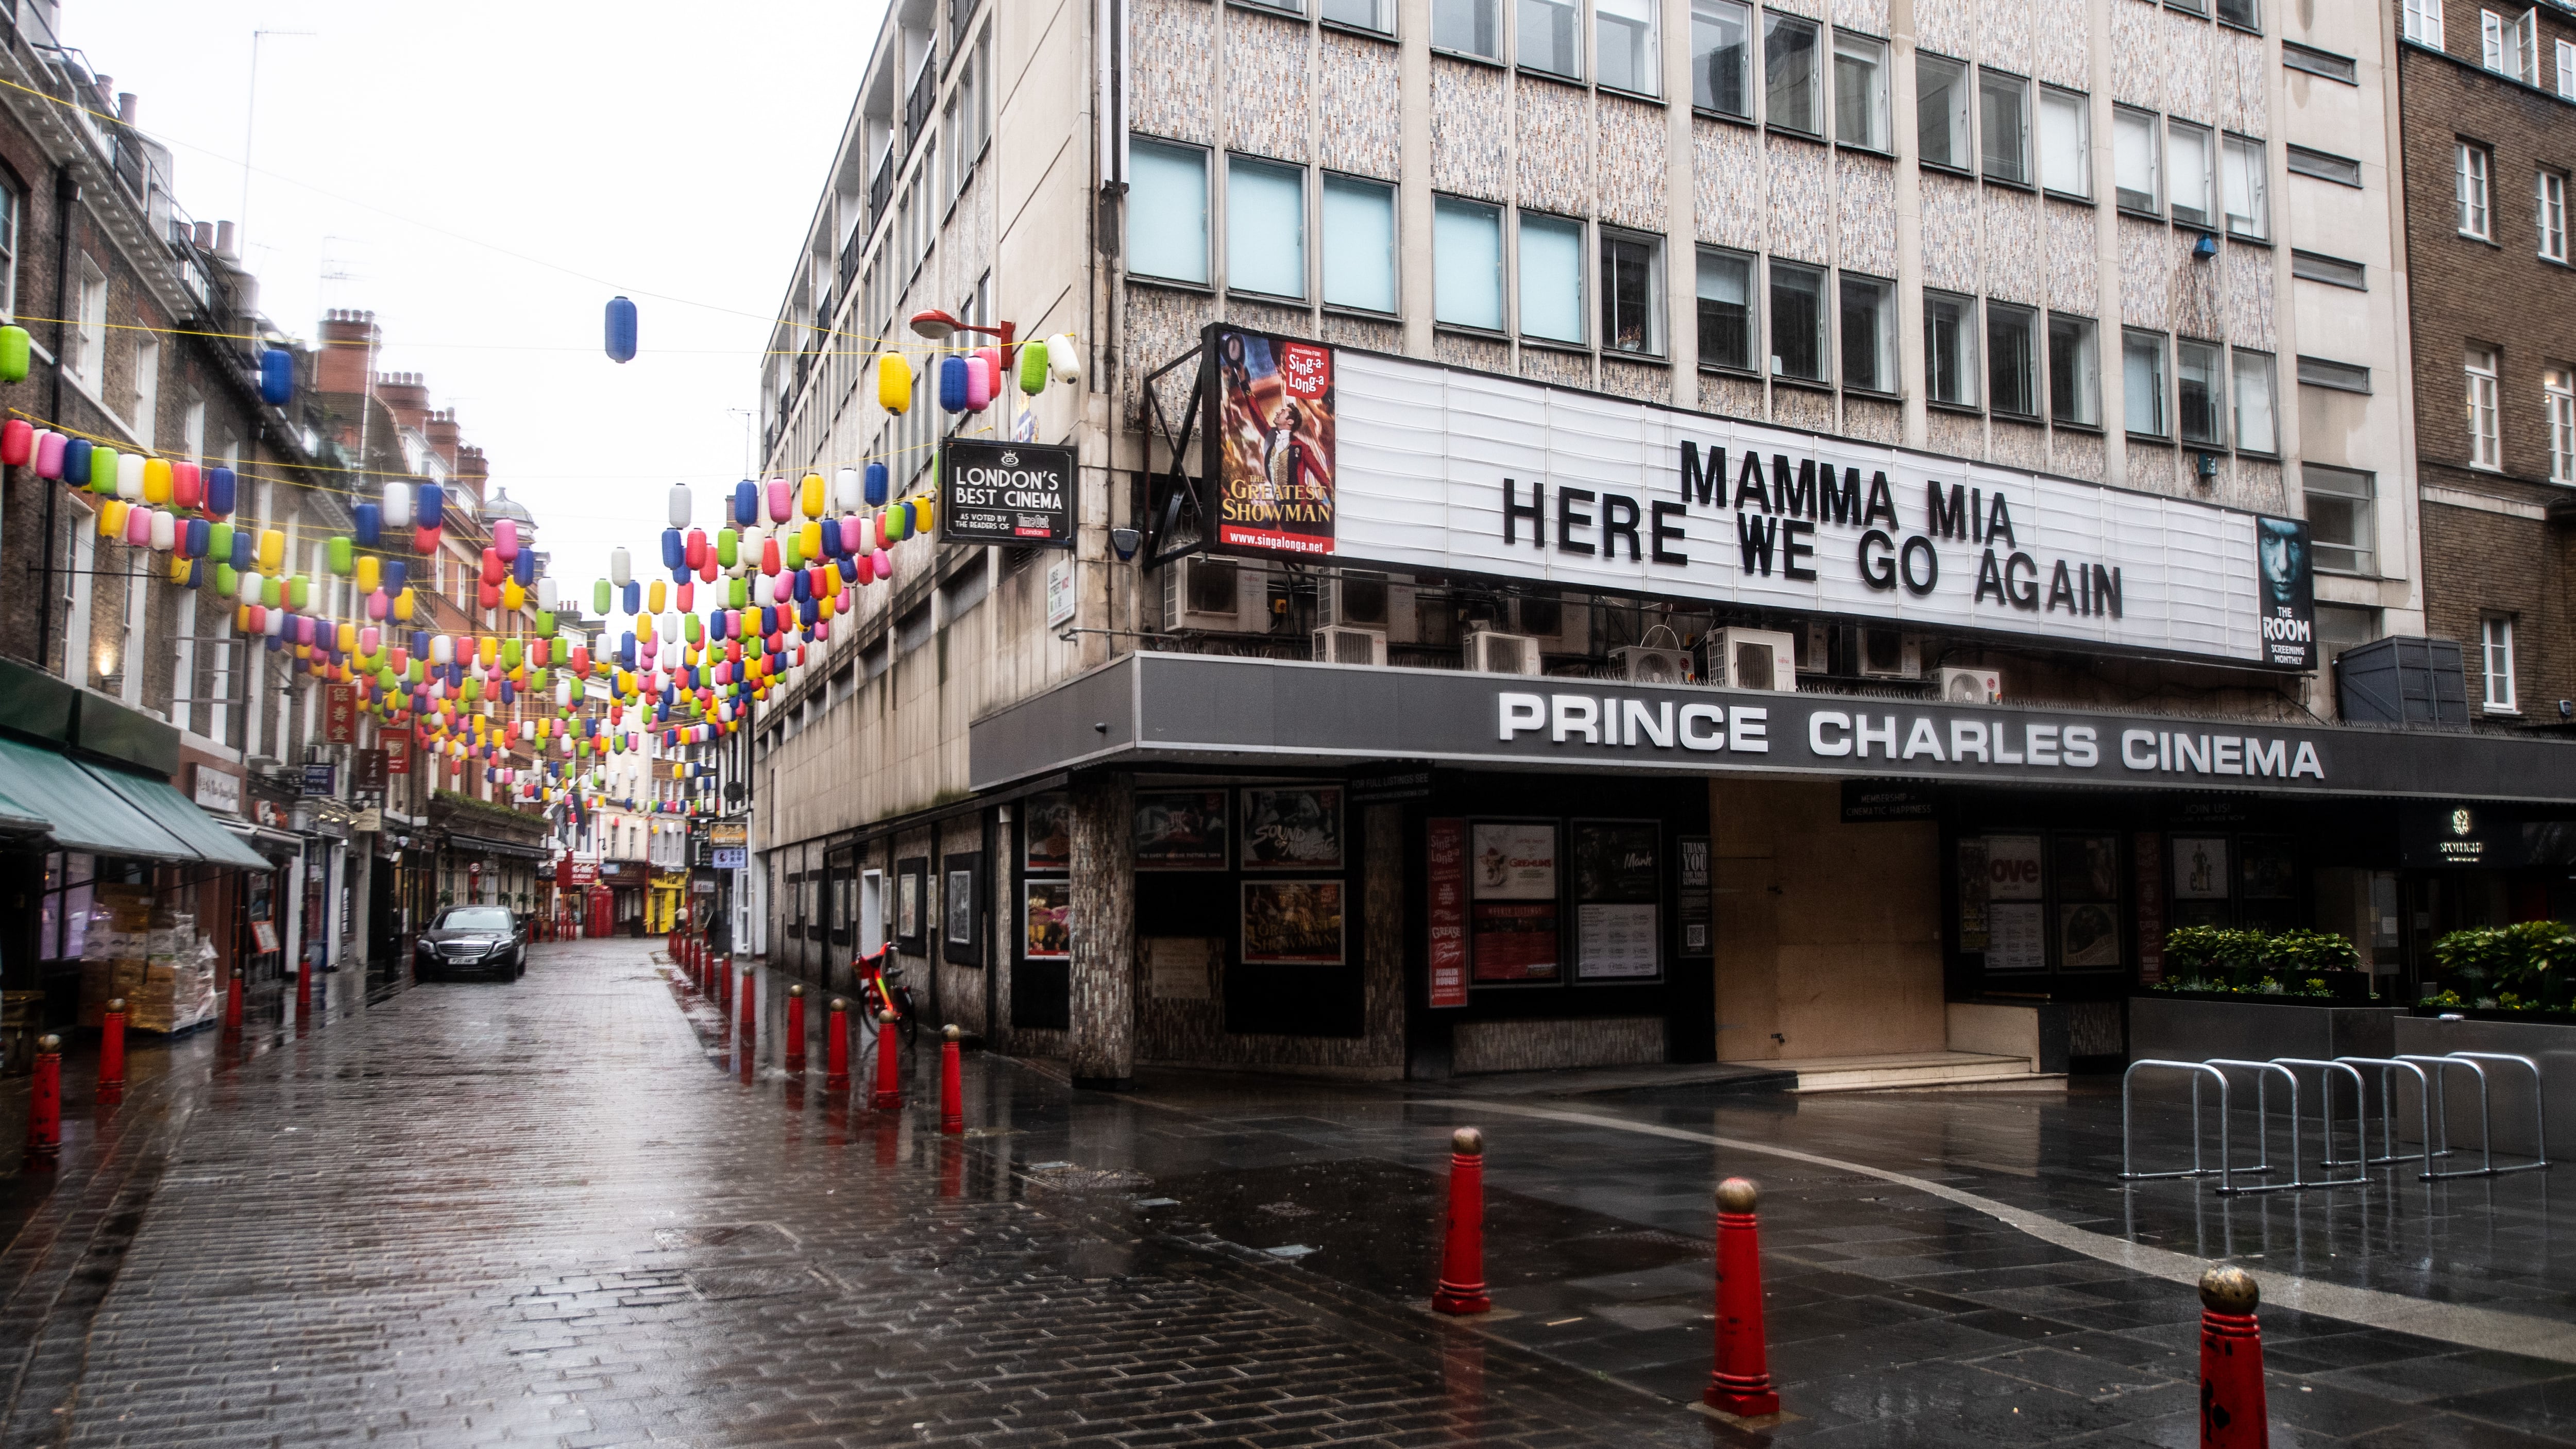 The Prince Charles Cinema in central London